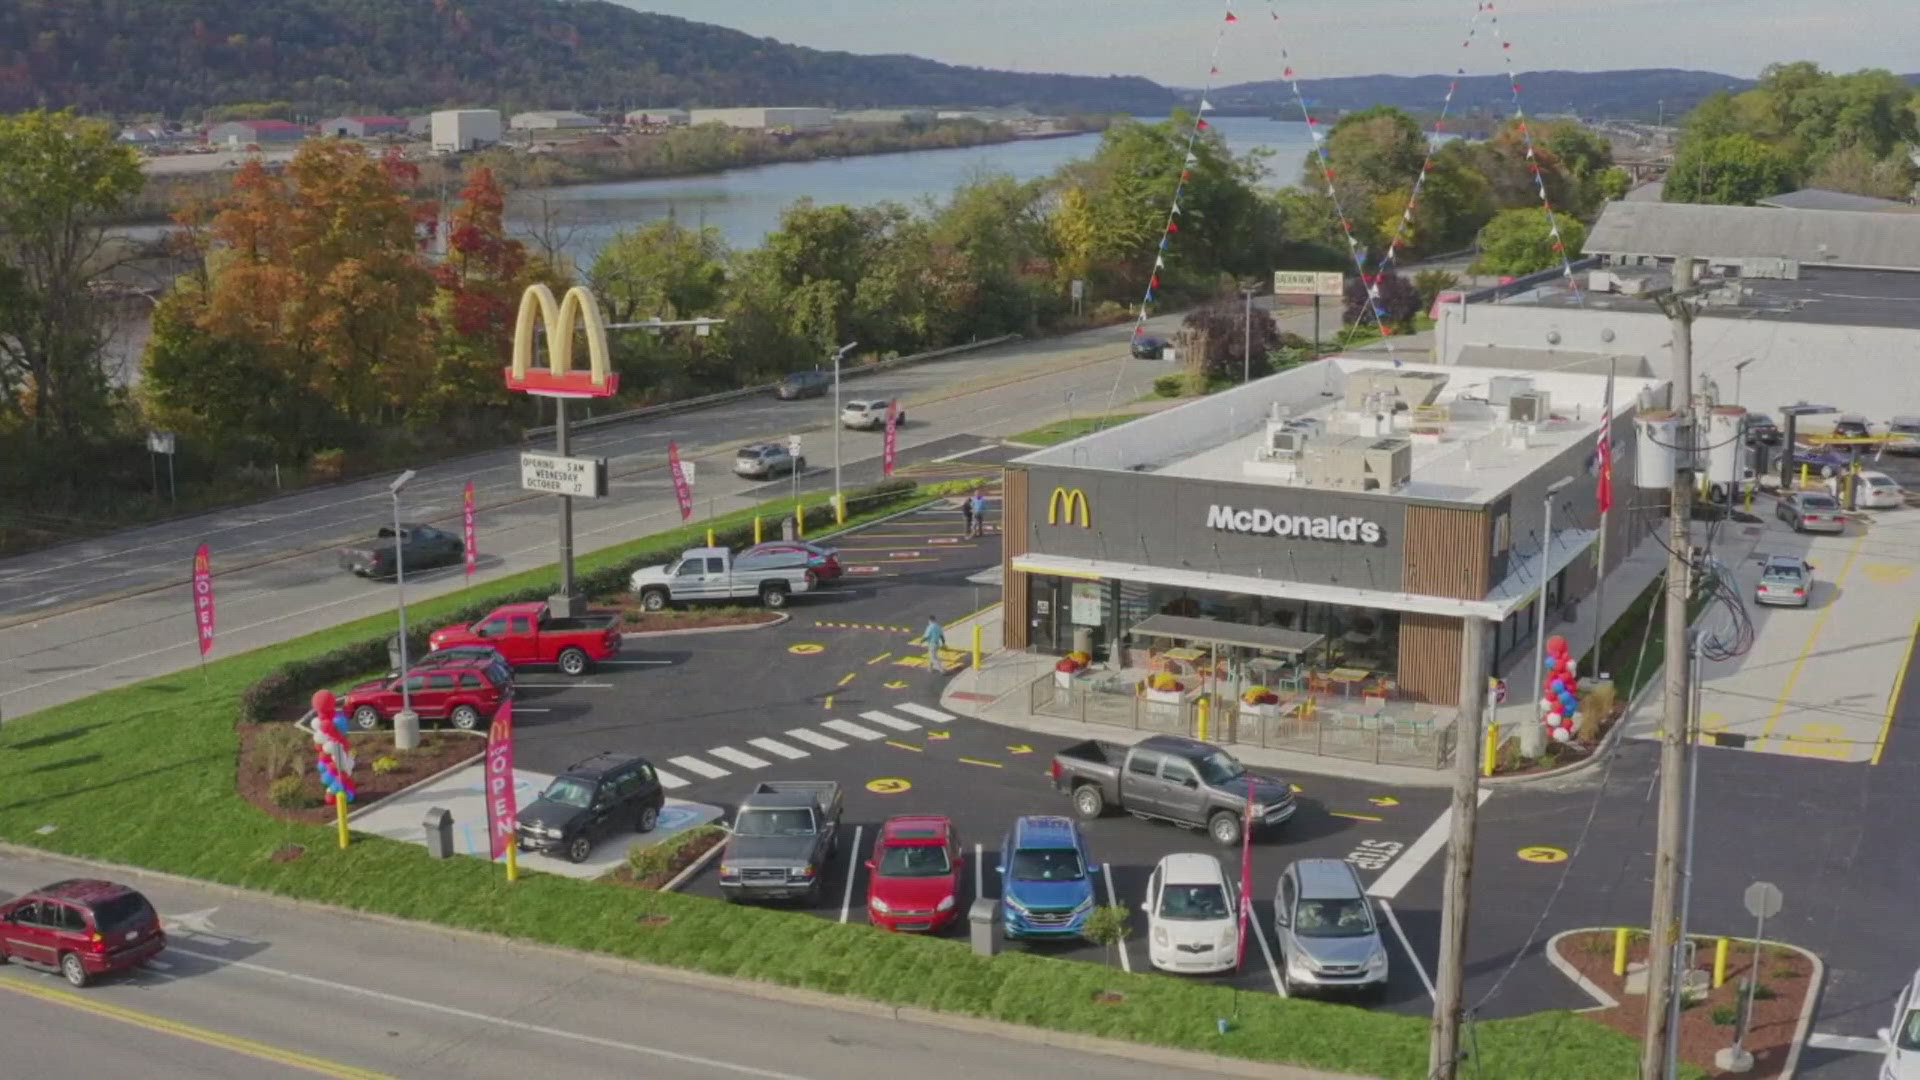 McDonalds is planning to add new, cheaper value meals to the menu soon.